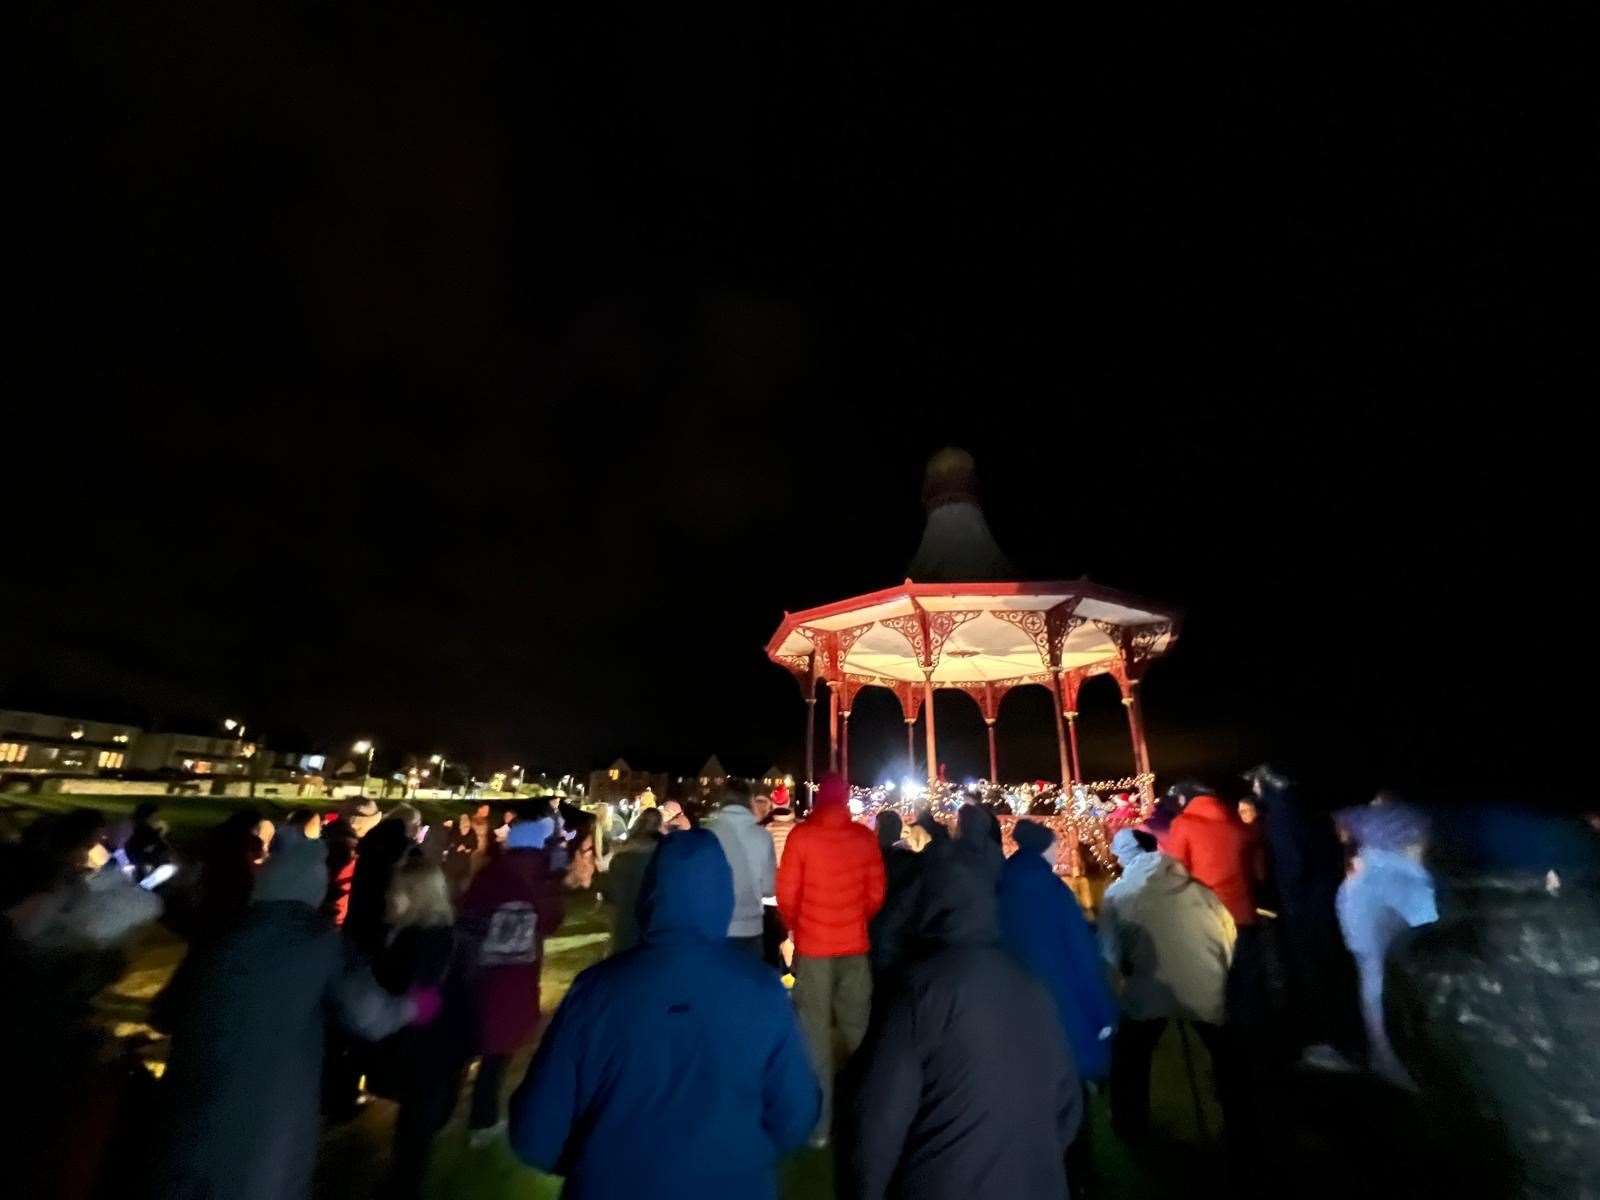 Crowds at the bandstand feeling festive. Pictures: Mandy E Rush.